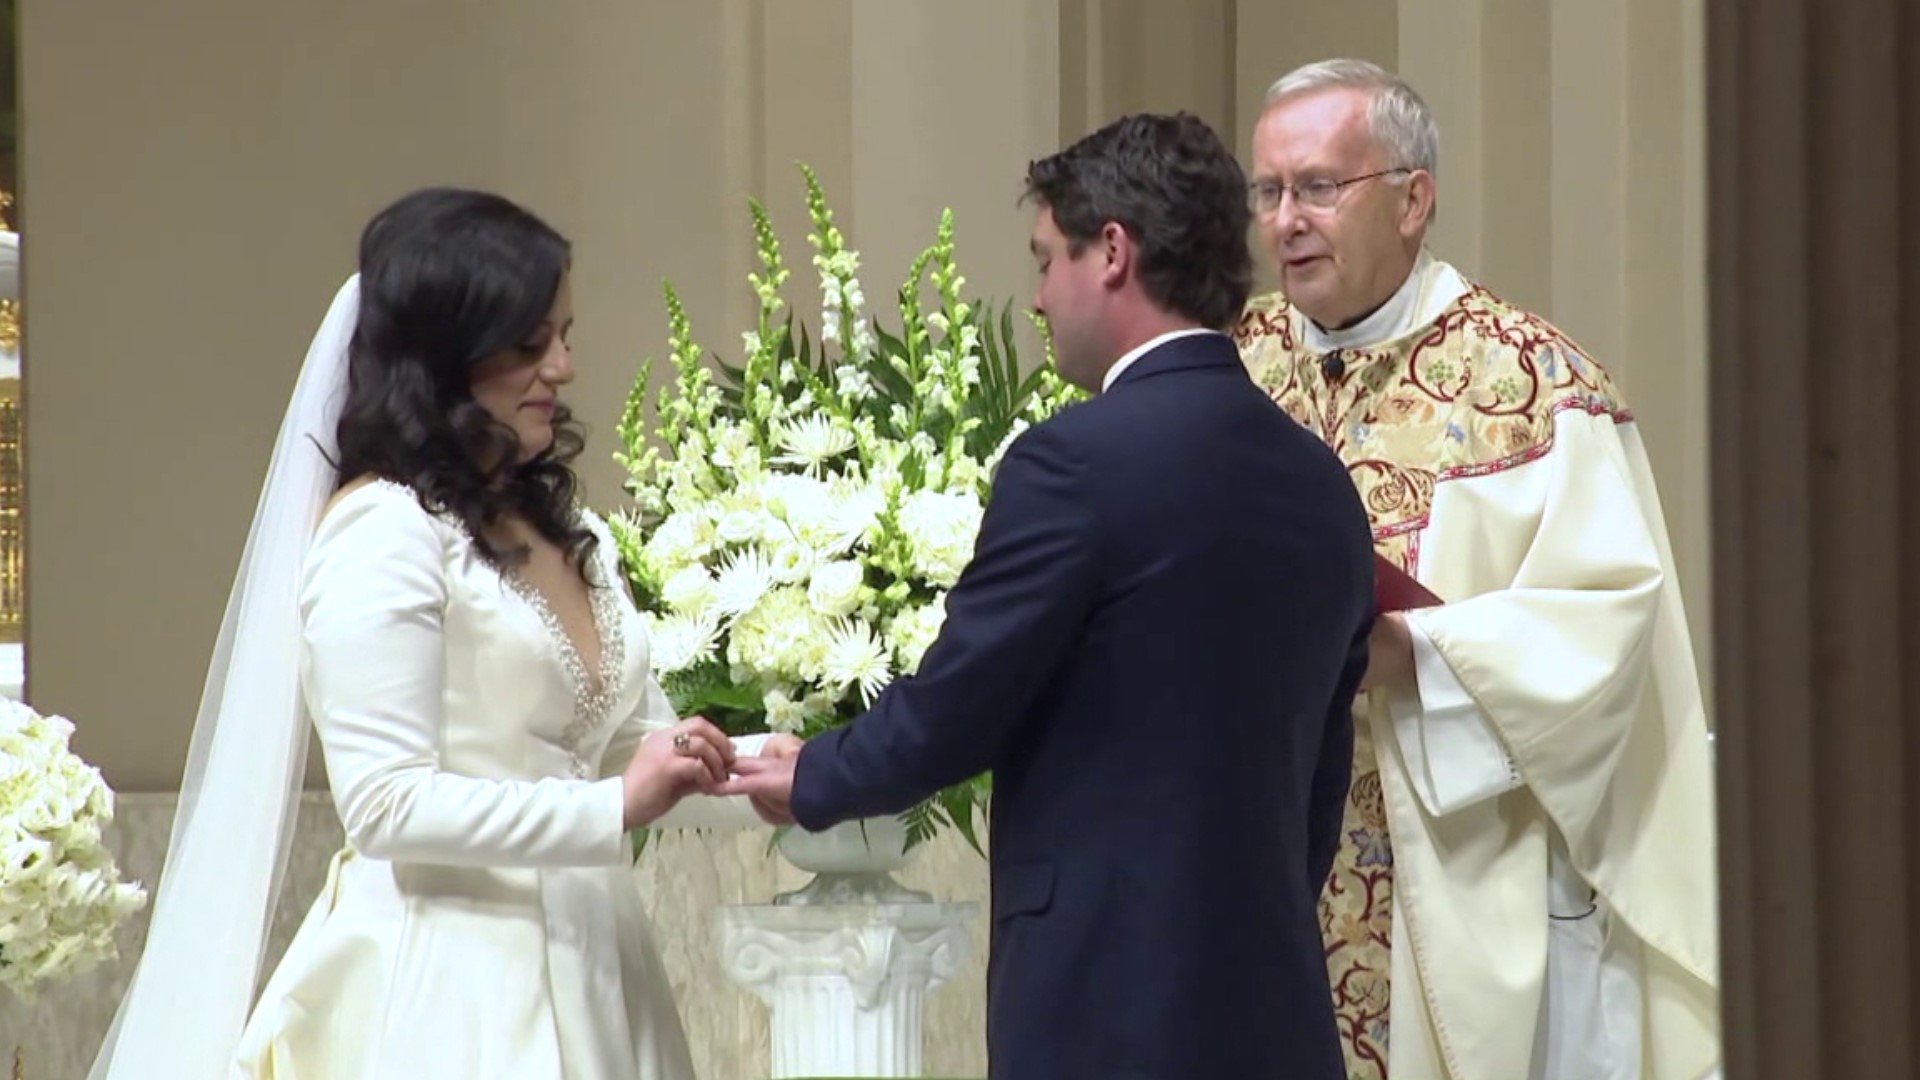 Newswatch's 16 own Carmella Mataloni got married on Saturday afternoon.